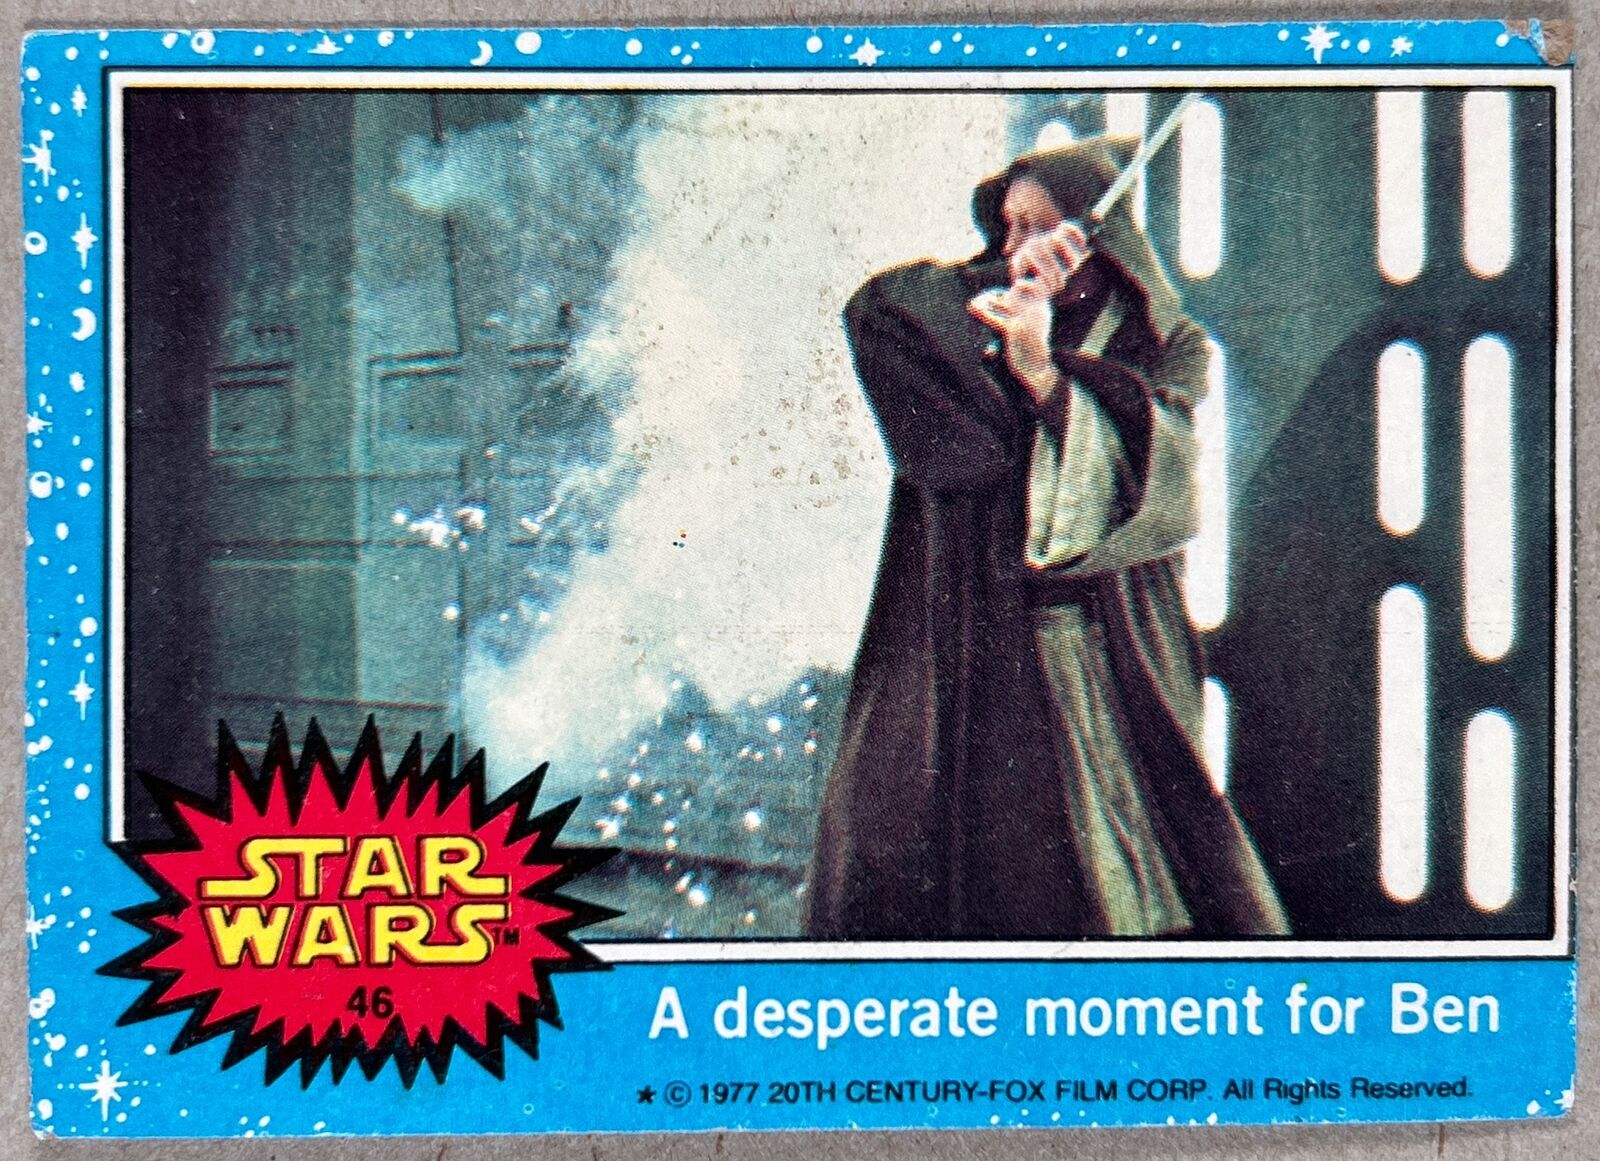 1977 Topps Star Wars #46 A desperate moment for Ben Card Blue Series 1